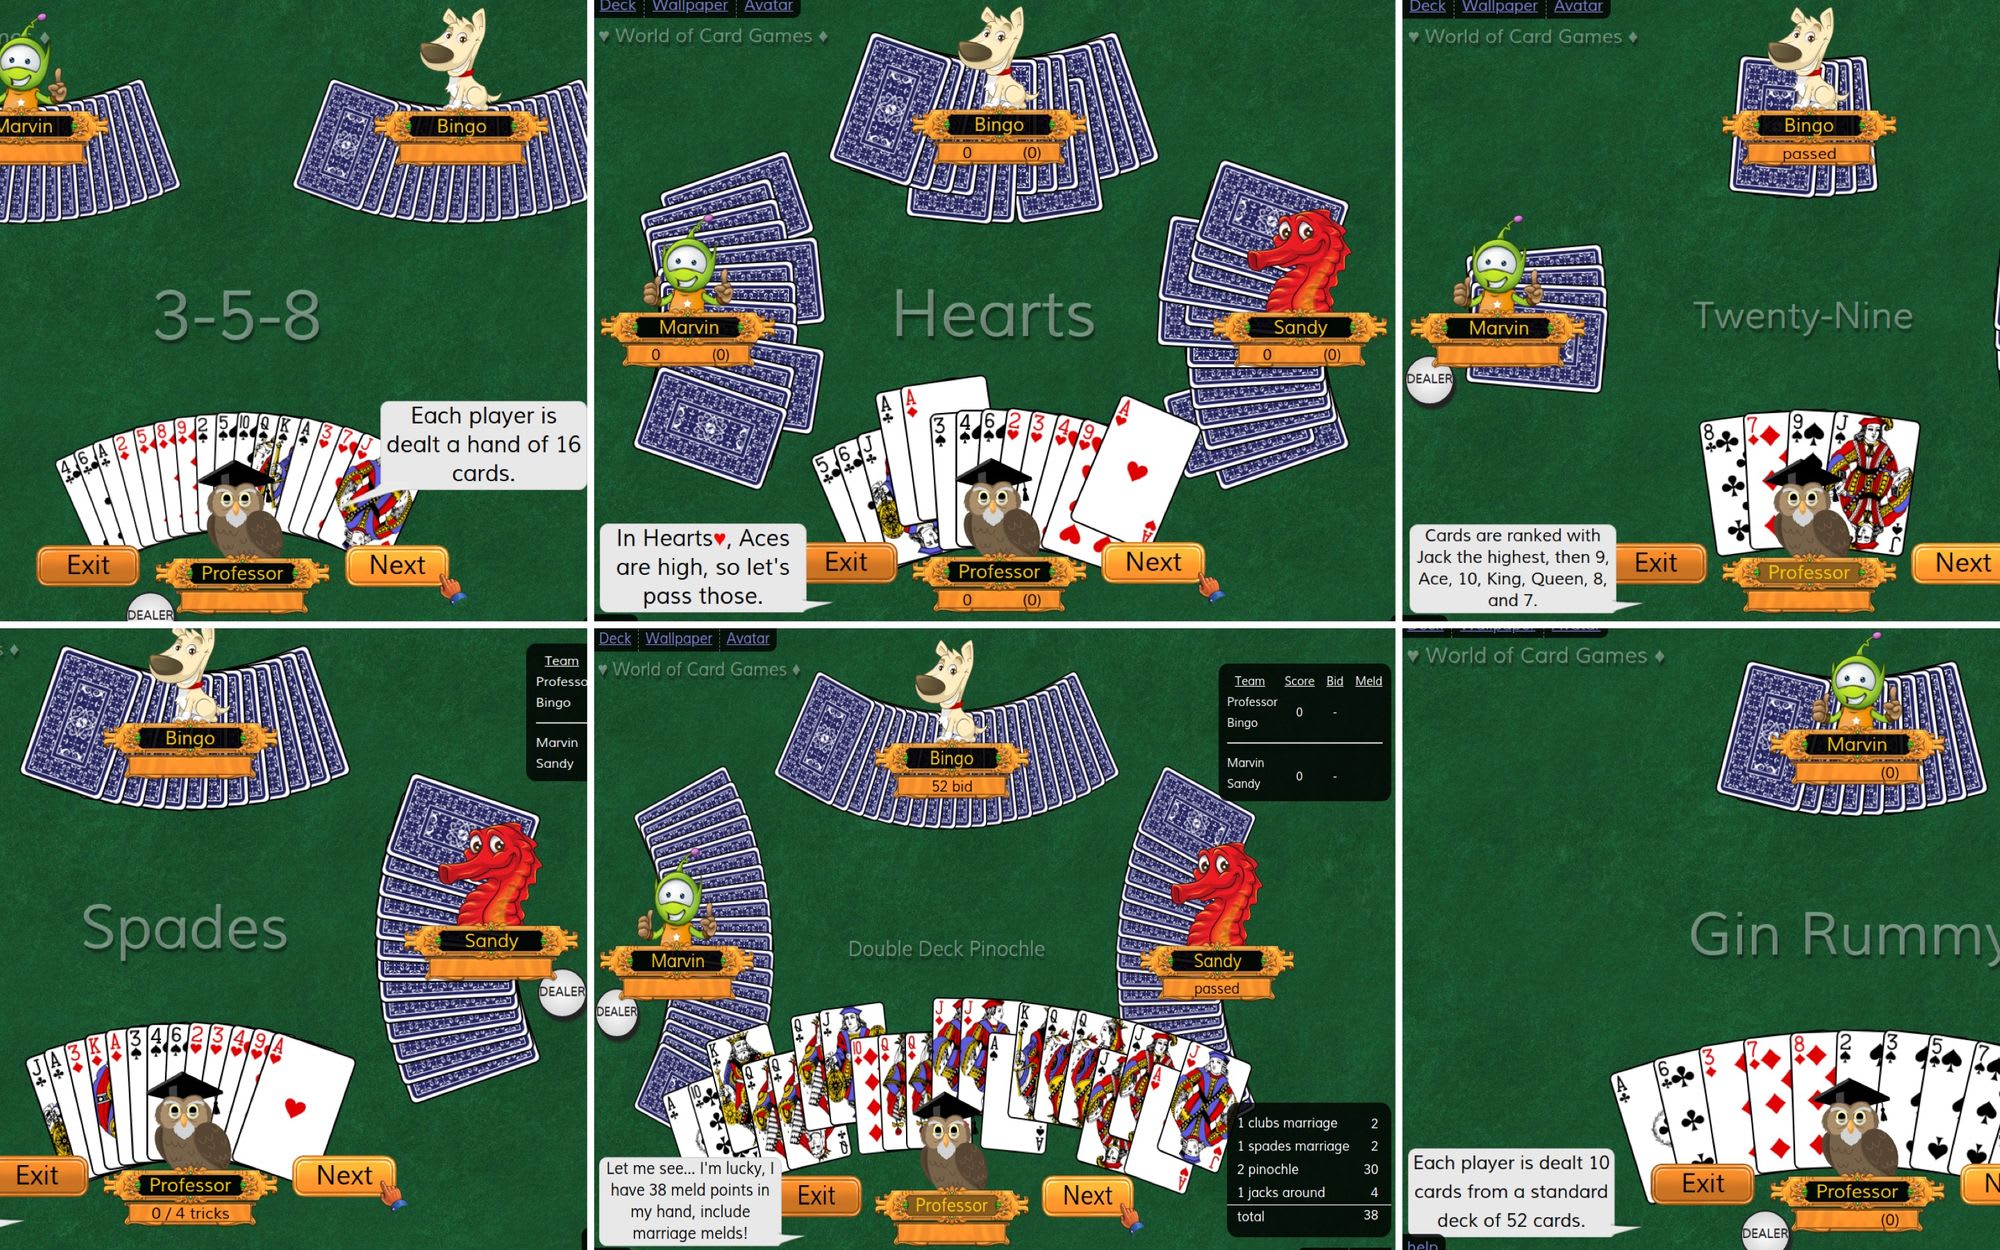 Introducing World of Card Games into the Online Solitaire family